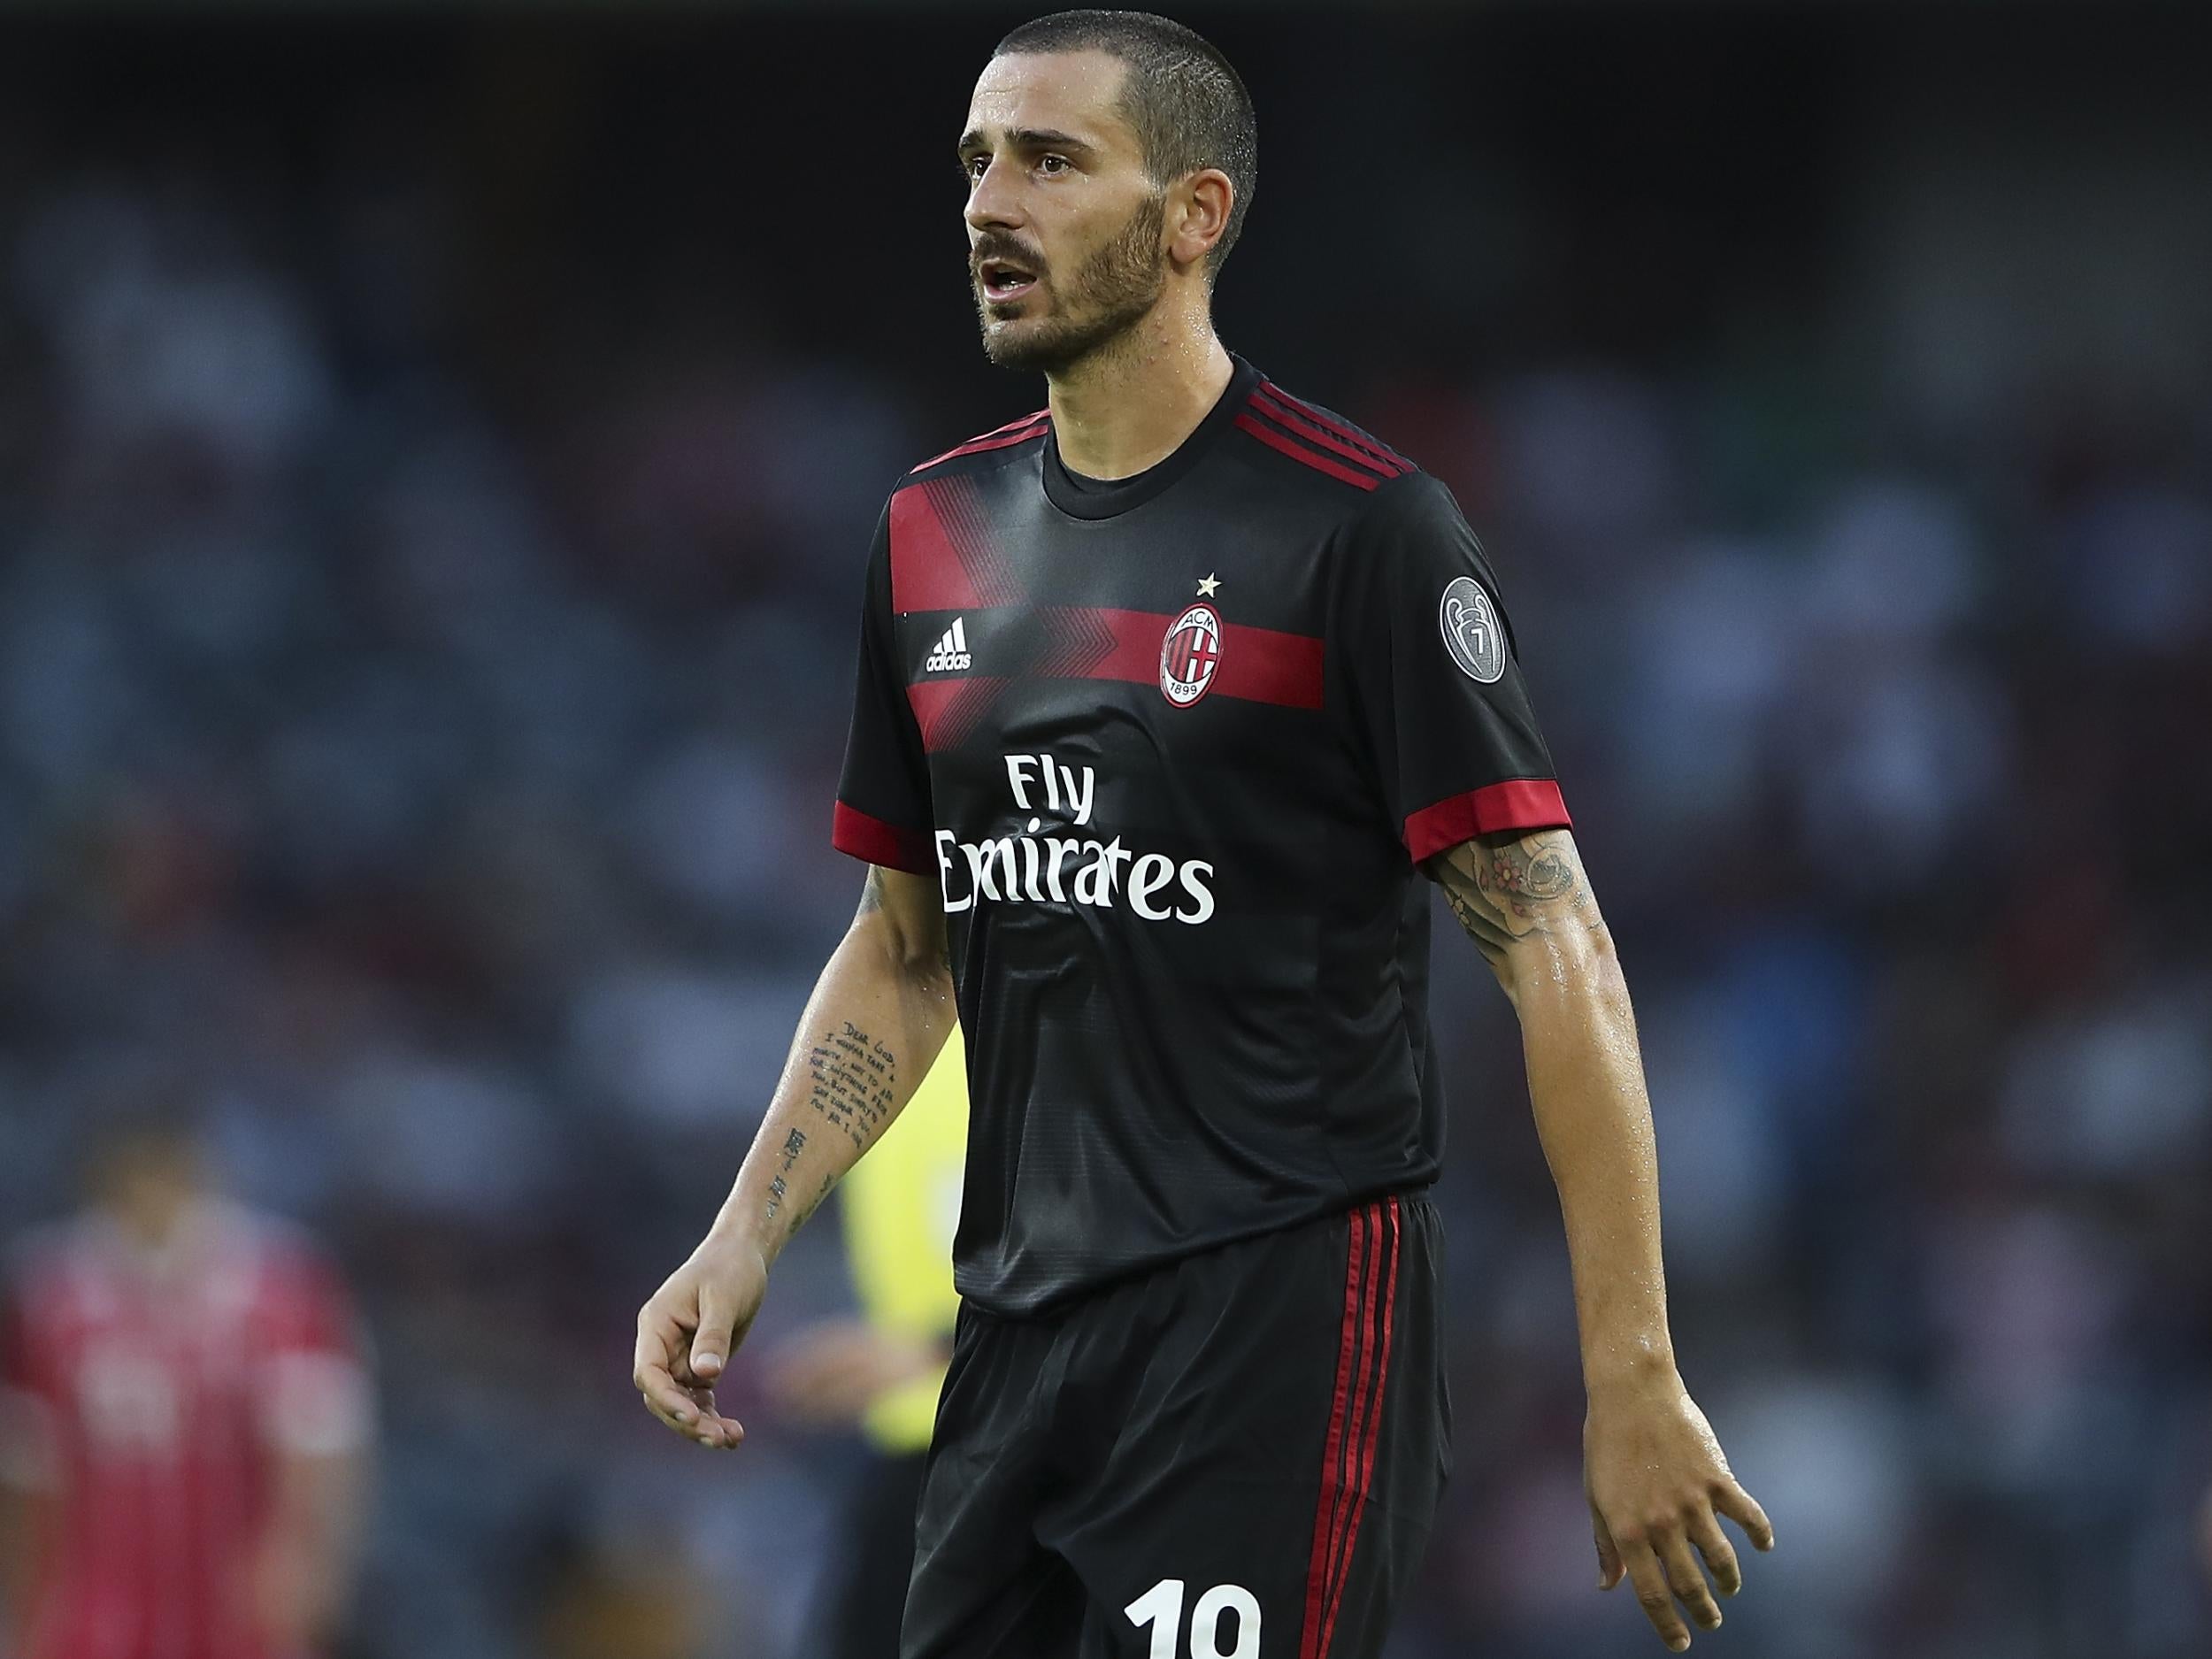 Bonucci had been linked with a move to the Premier League